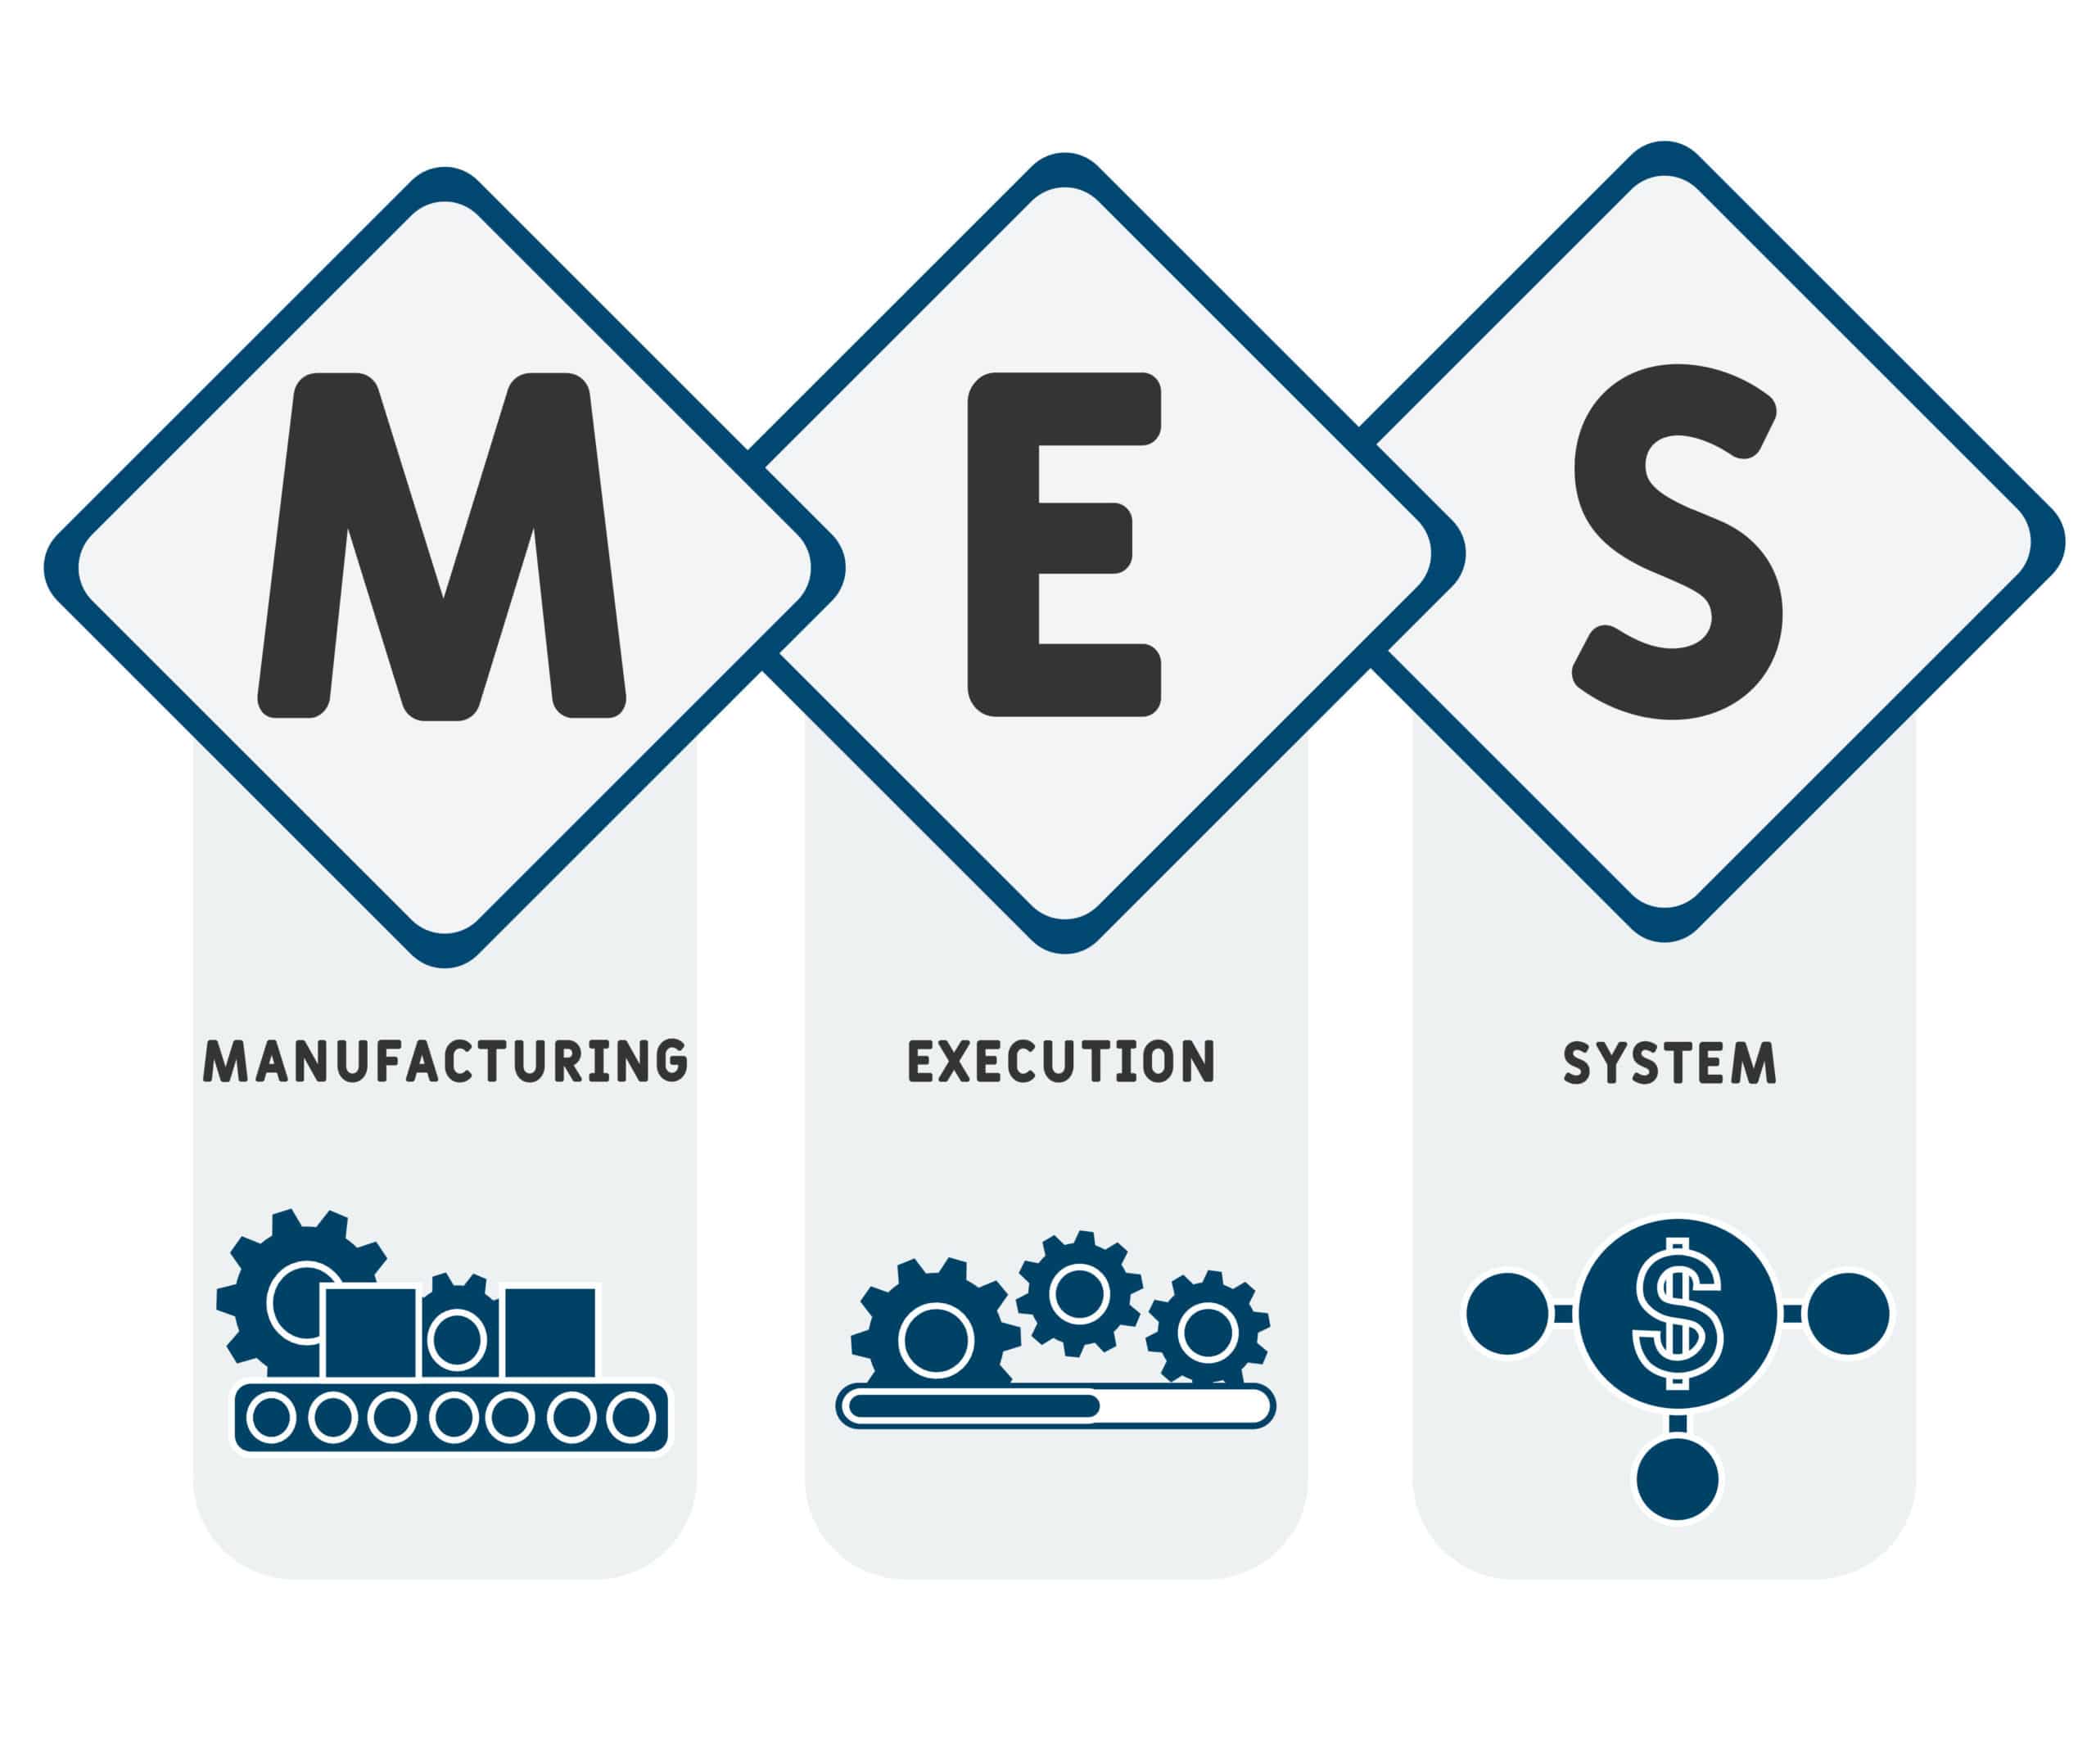 Diagram illustrating the concept of Manufacturing Execution Systems (MES) with three sections labeled 'Manufacturing,' 'Execution,' and 'System.' Each section features an icon: a conveyor belt with machinery, gears in operation, and a connected system symbol with a dollar sign, respectively, representing the integration and efficiency of MES in manufacturing processes.